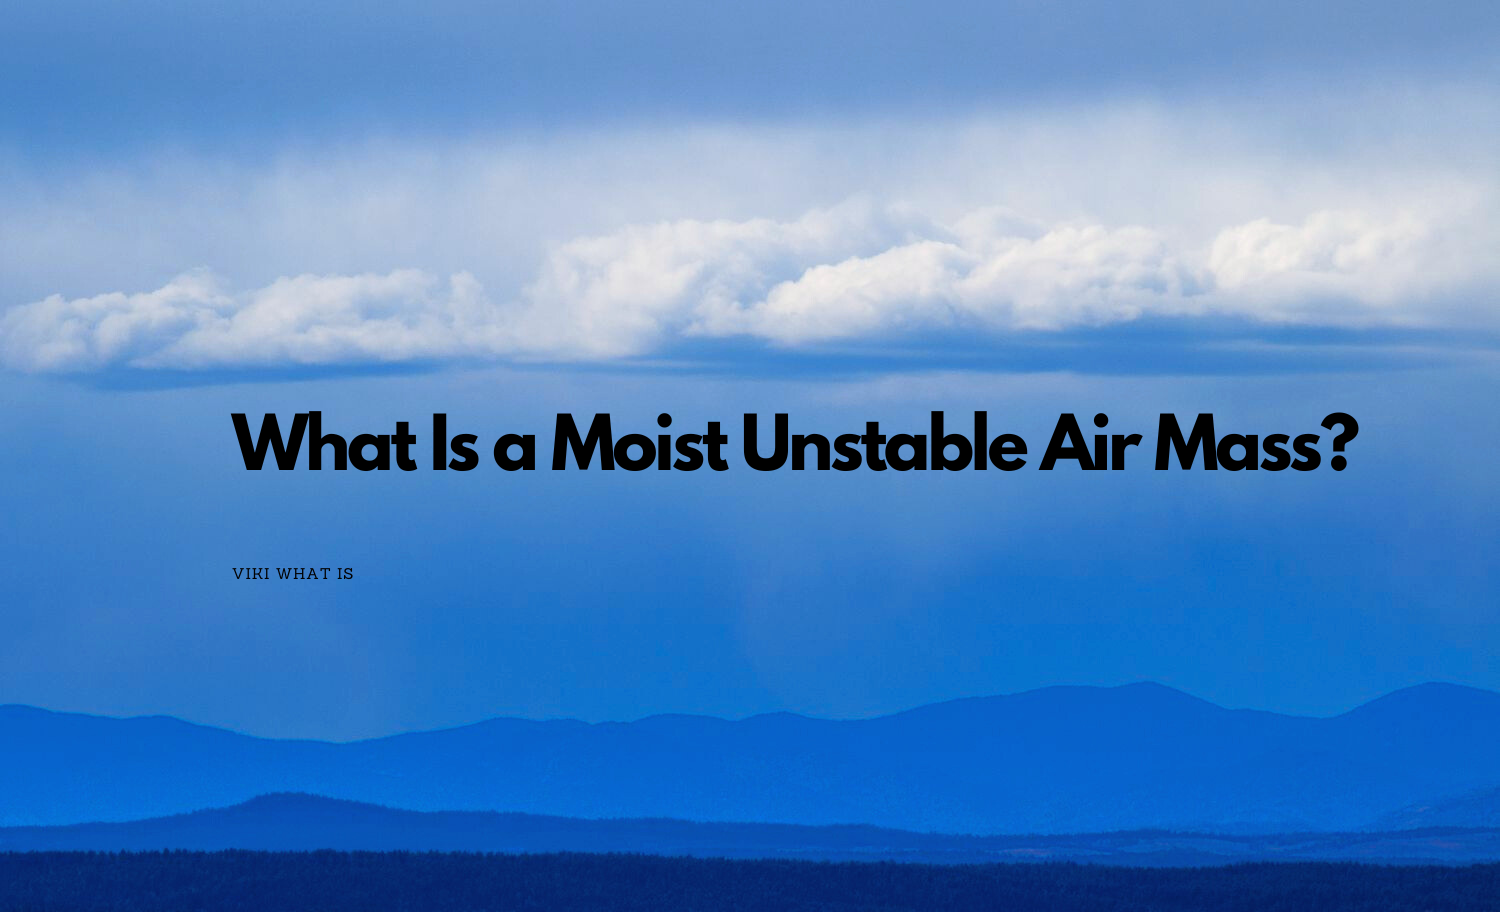 What Is a Moist Unstable Air Mass?